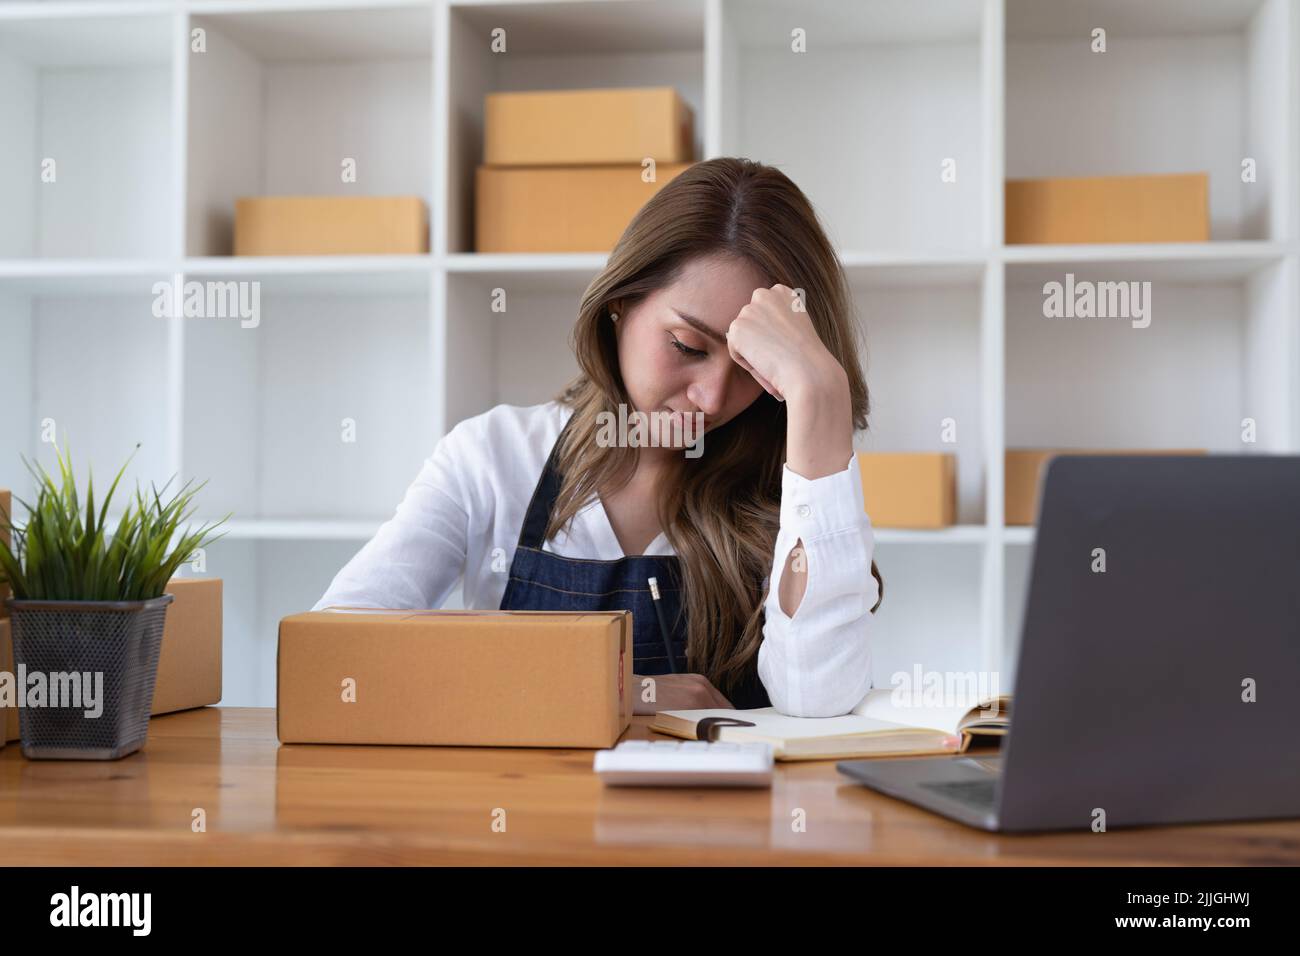 Portrait of a Startup, Small Business, SME Owner, Female Entrepreneur Stressed about falling sales work on parcel boxes Order receipts and checks Stock Photo